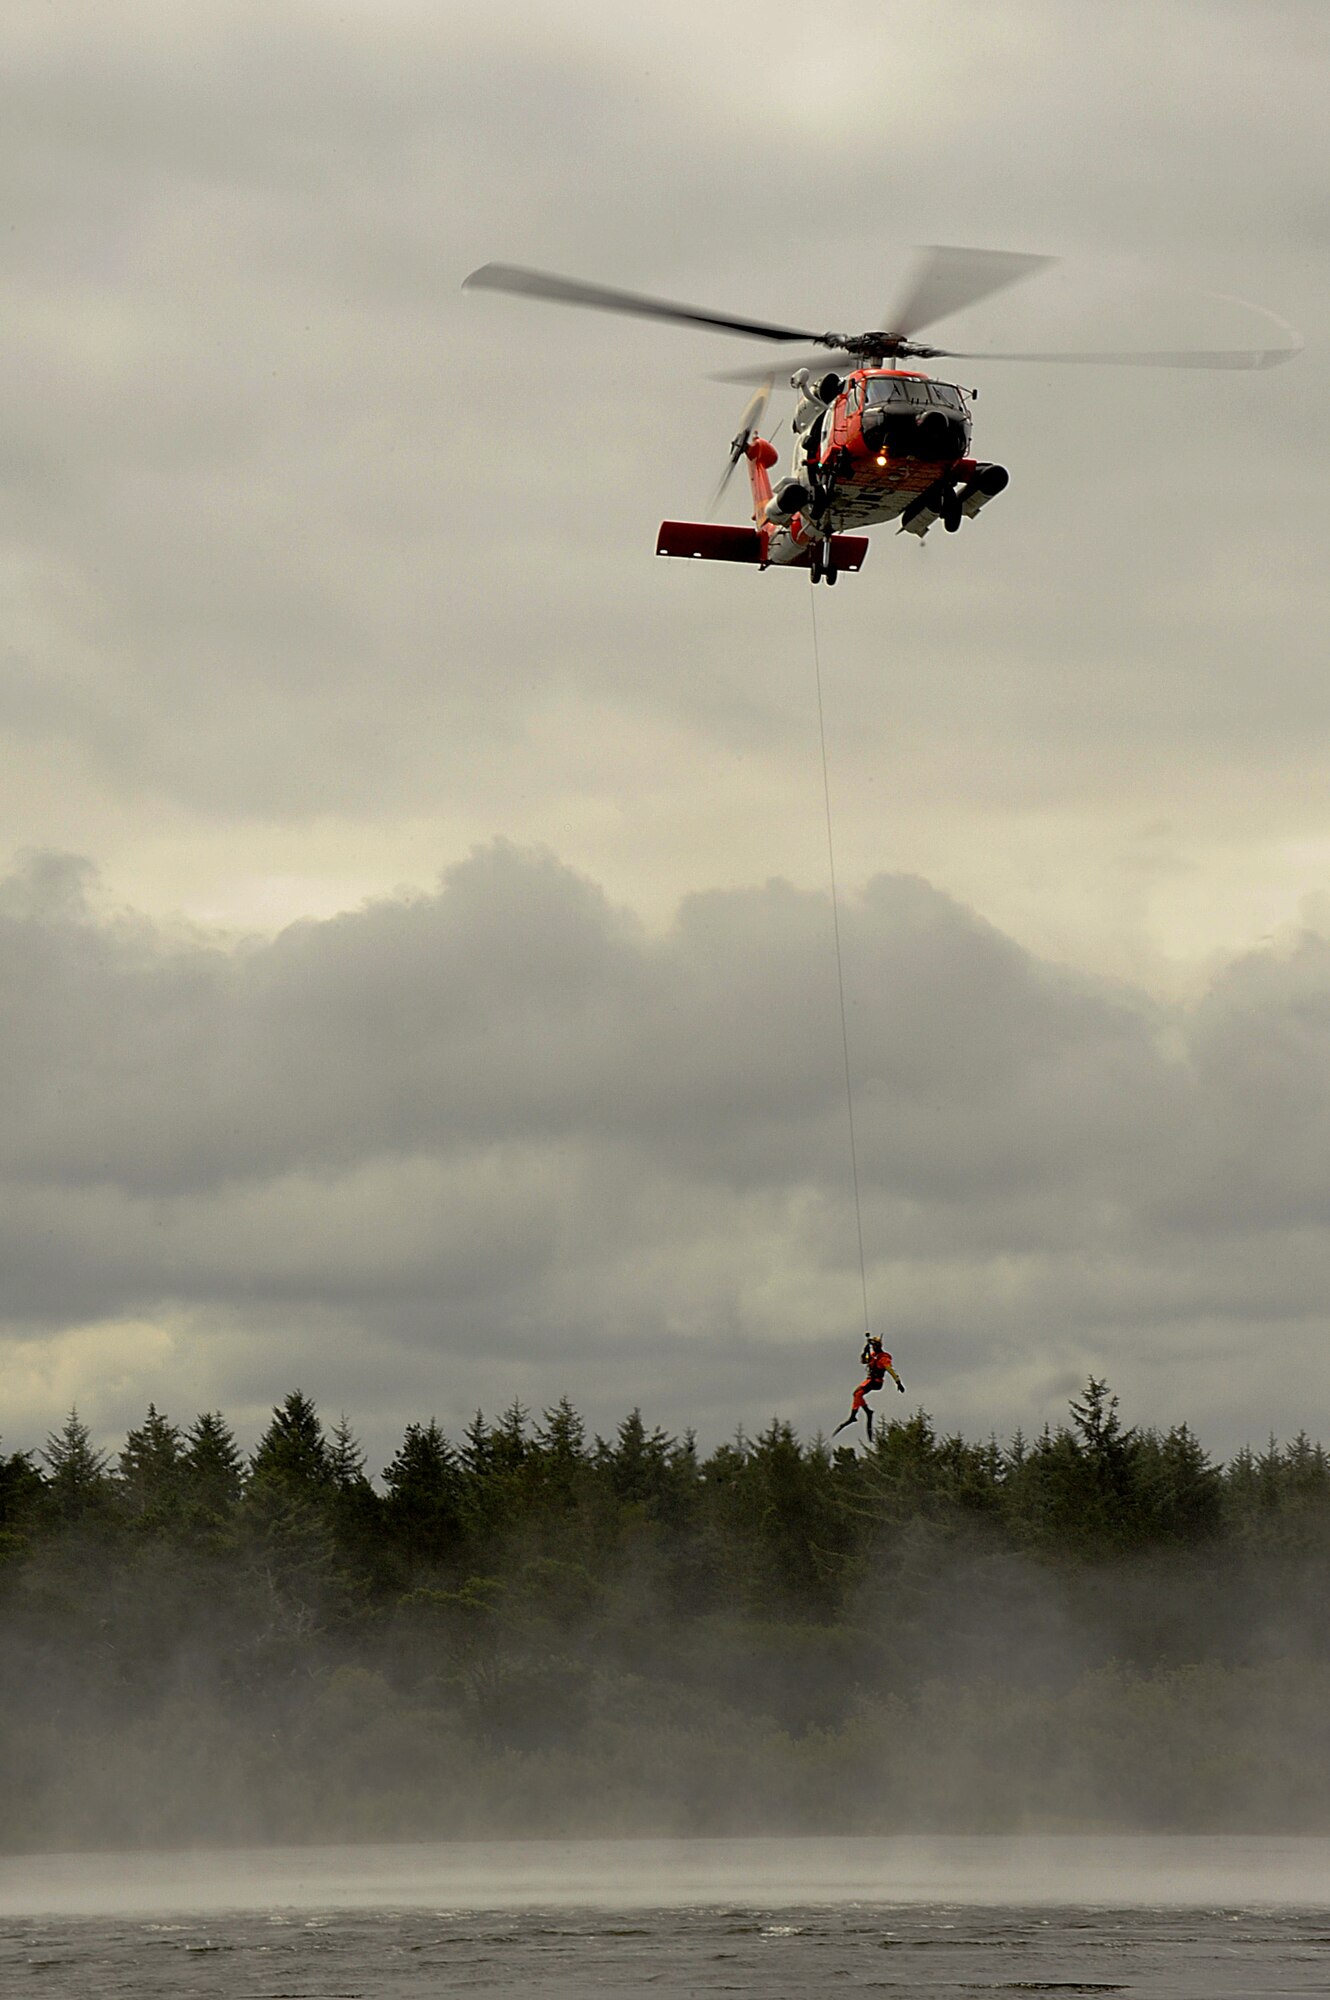 A U.S. Coast Guard HH-60 Jayhawk helicopter, from Air Station Astoria, drops a rescue diver into Slusher Lake at Camp Rilea, in Warrenton, Oregon, during the Pathfinder-Minutemen Exercise, Aug. 5, 2015 at Camp Rilea in Warrenton, Ore. The annual event is a joint multi-agency, multi-state disaster preparedness exercise based on response to a possible Cascadia Subduction Zone event. Officials believe the Northwest is overdue for a magnitude 7.0 or greater earthquake. (U.S. Air National Guard photo by Tech. Sgt. John Hughel, 142nd Fighter Wing Public Affairs/Released)
